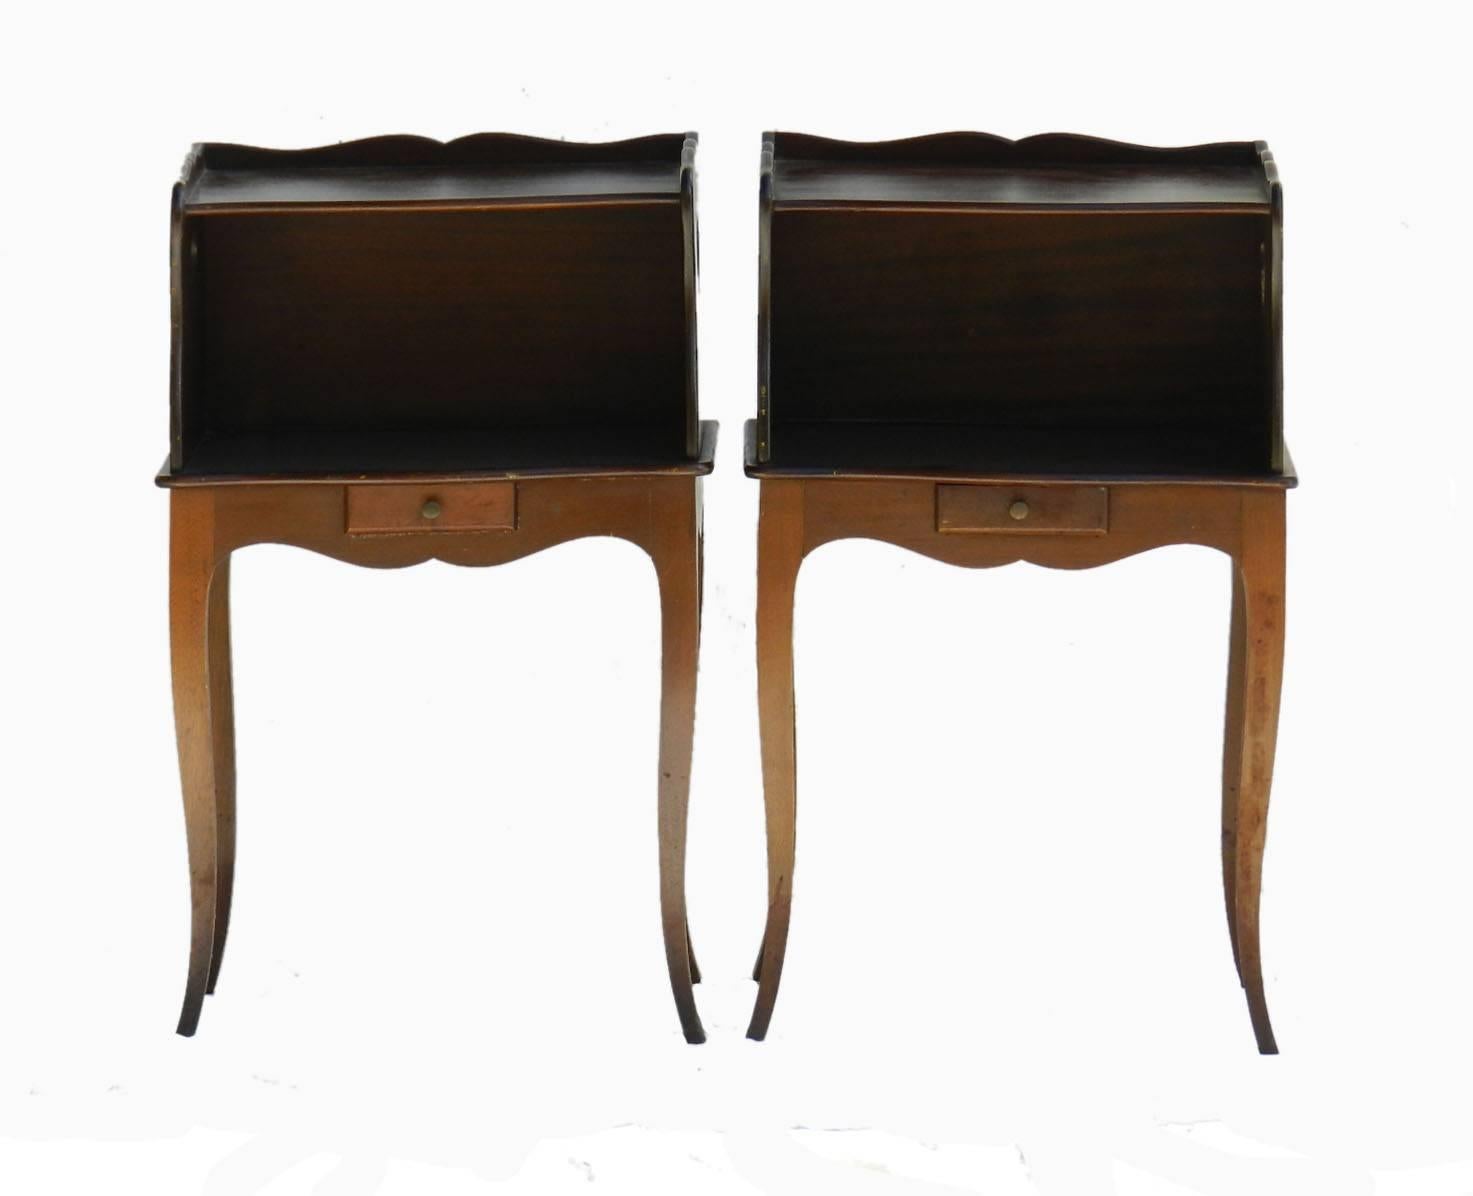 Pair of French Provincial side cabinets 20th century
Bedside table nightstands
Mid-20th century Louis revival
Typical Provincial sweet heart cut-out sides
Each with a very small drawer
Good condition with some marks of use quite usual for their